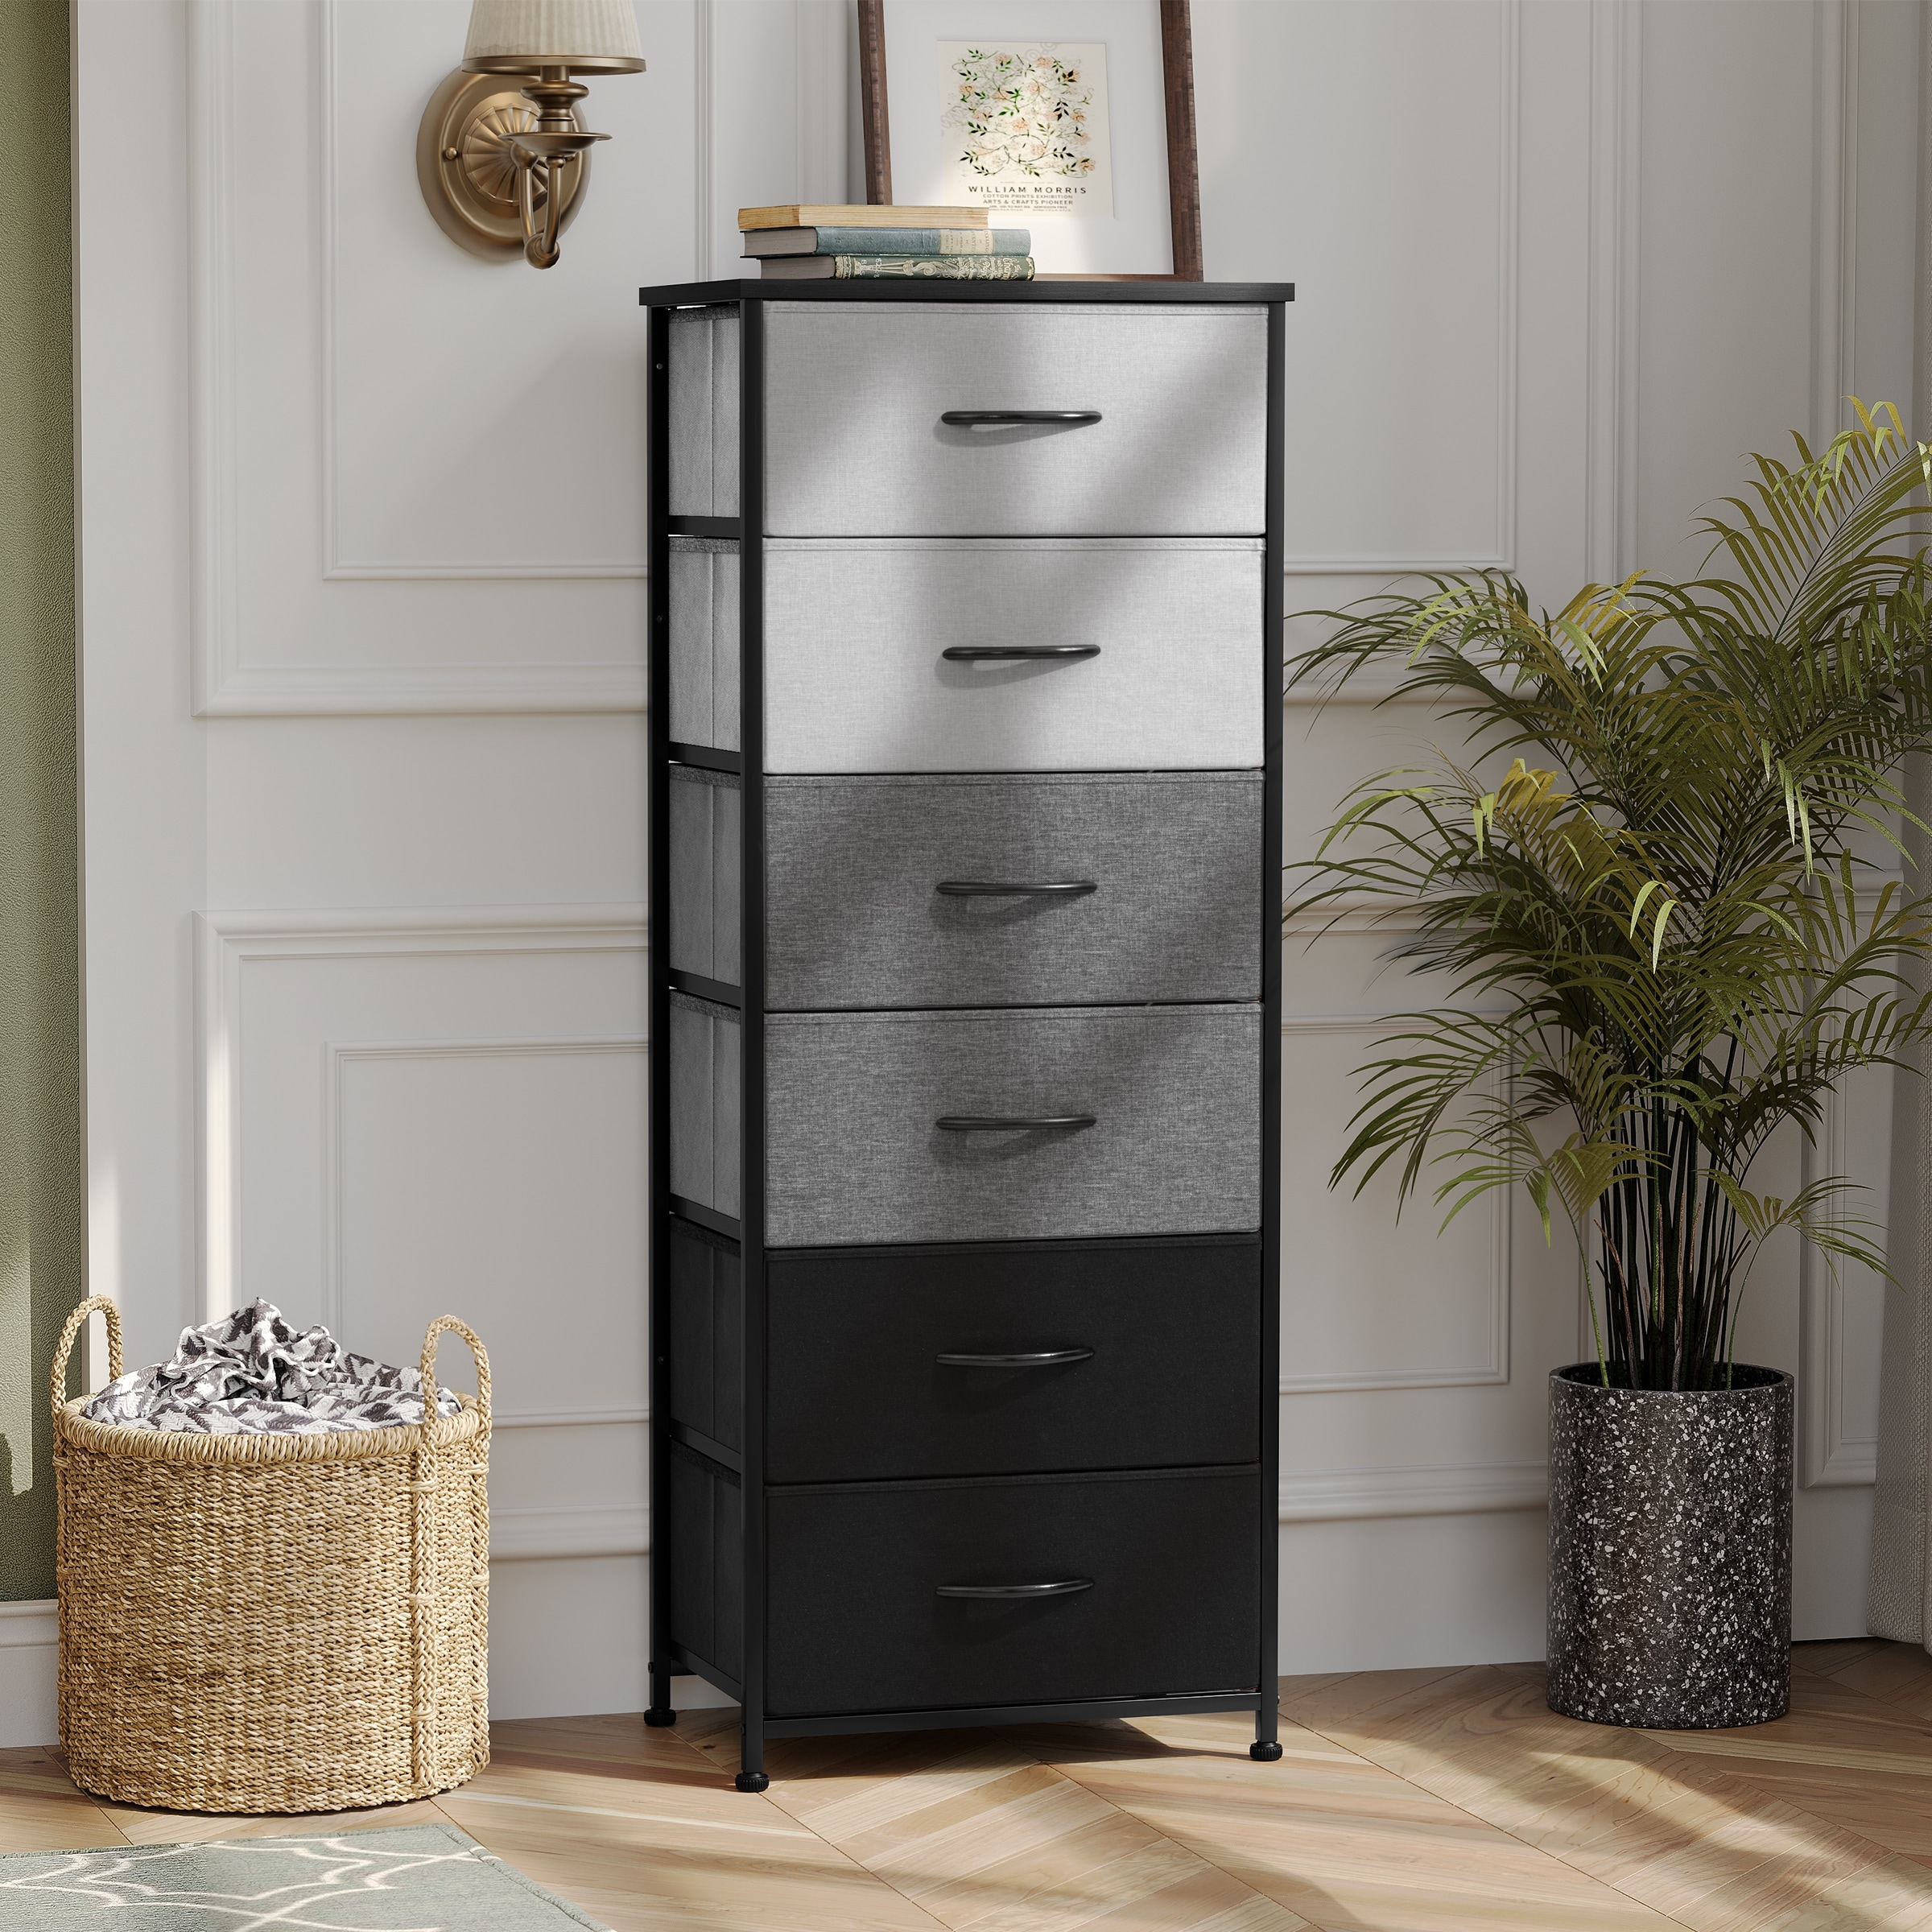 https://ak1.ostkcdn.com/images/products/is/images/direct/c585849158df17df64e7c51c1f6cdf30cf3a633f/Pellebant-6-Drawers-Vertical-Storage-Tower.jpg